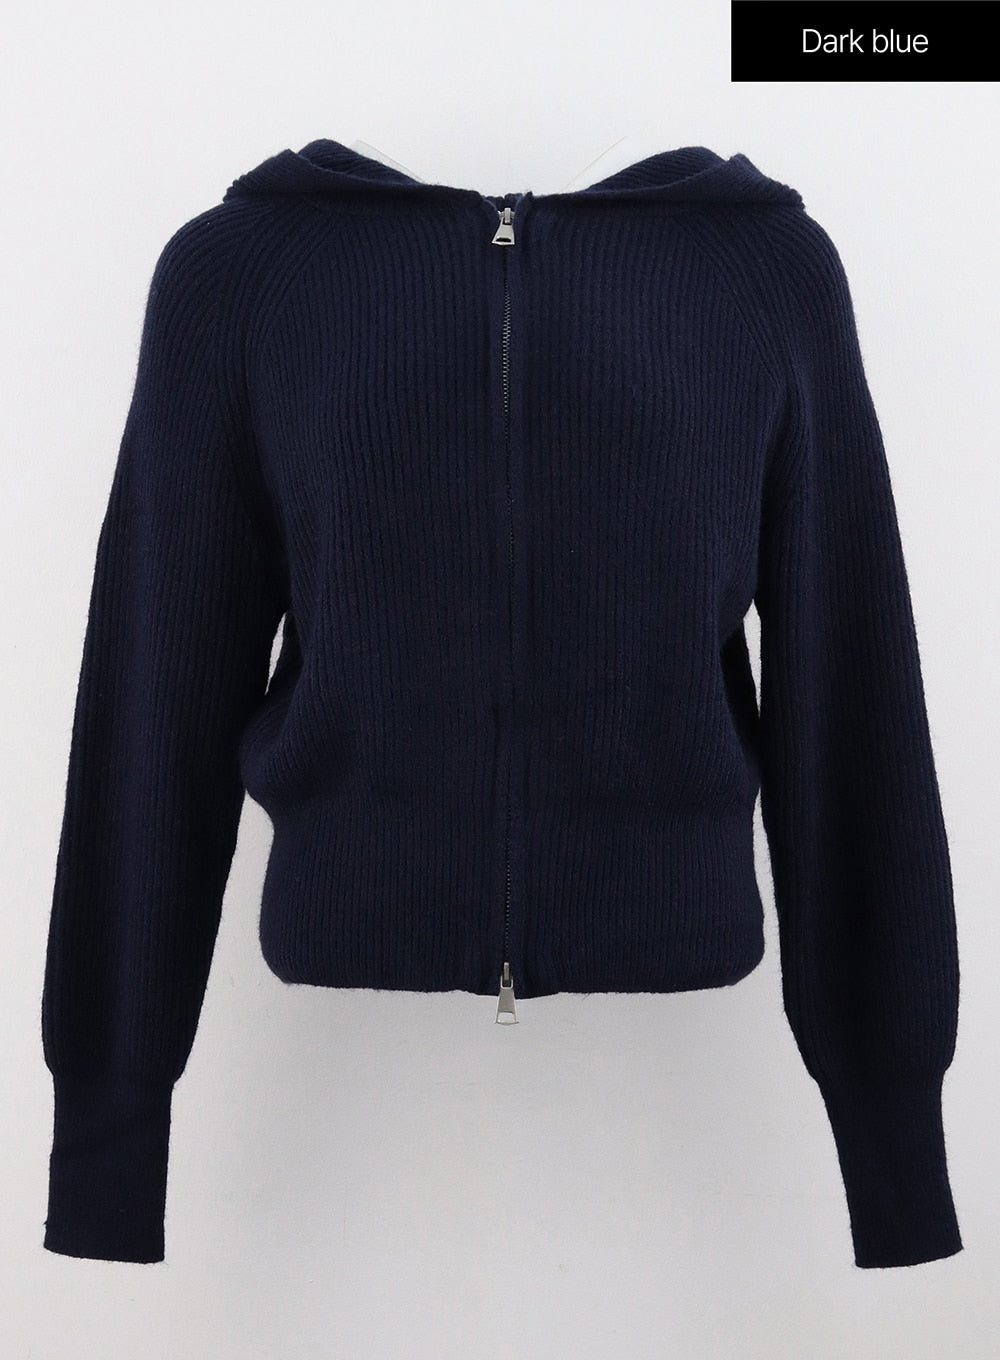 Hooded knit zip-up cardigan